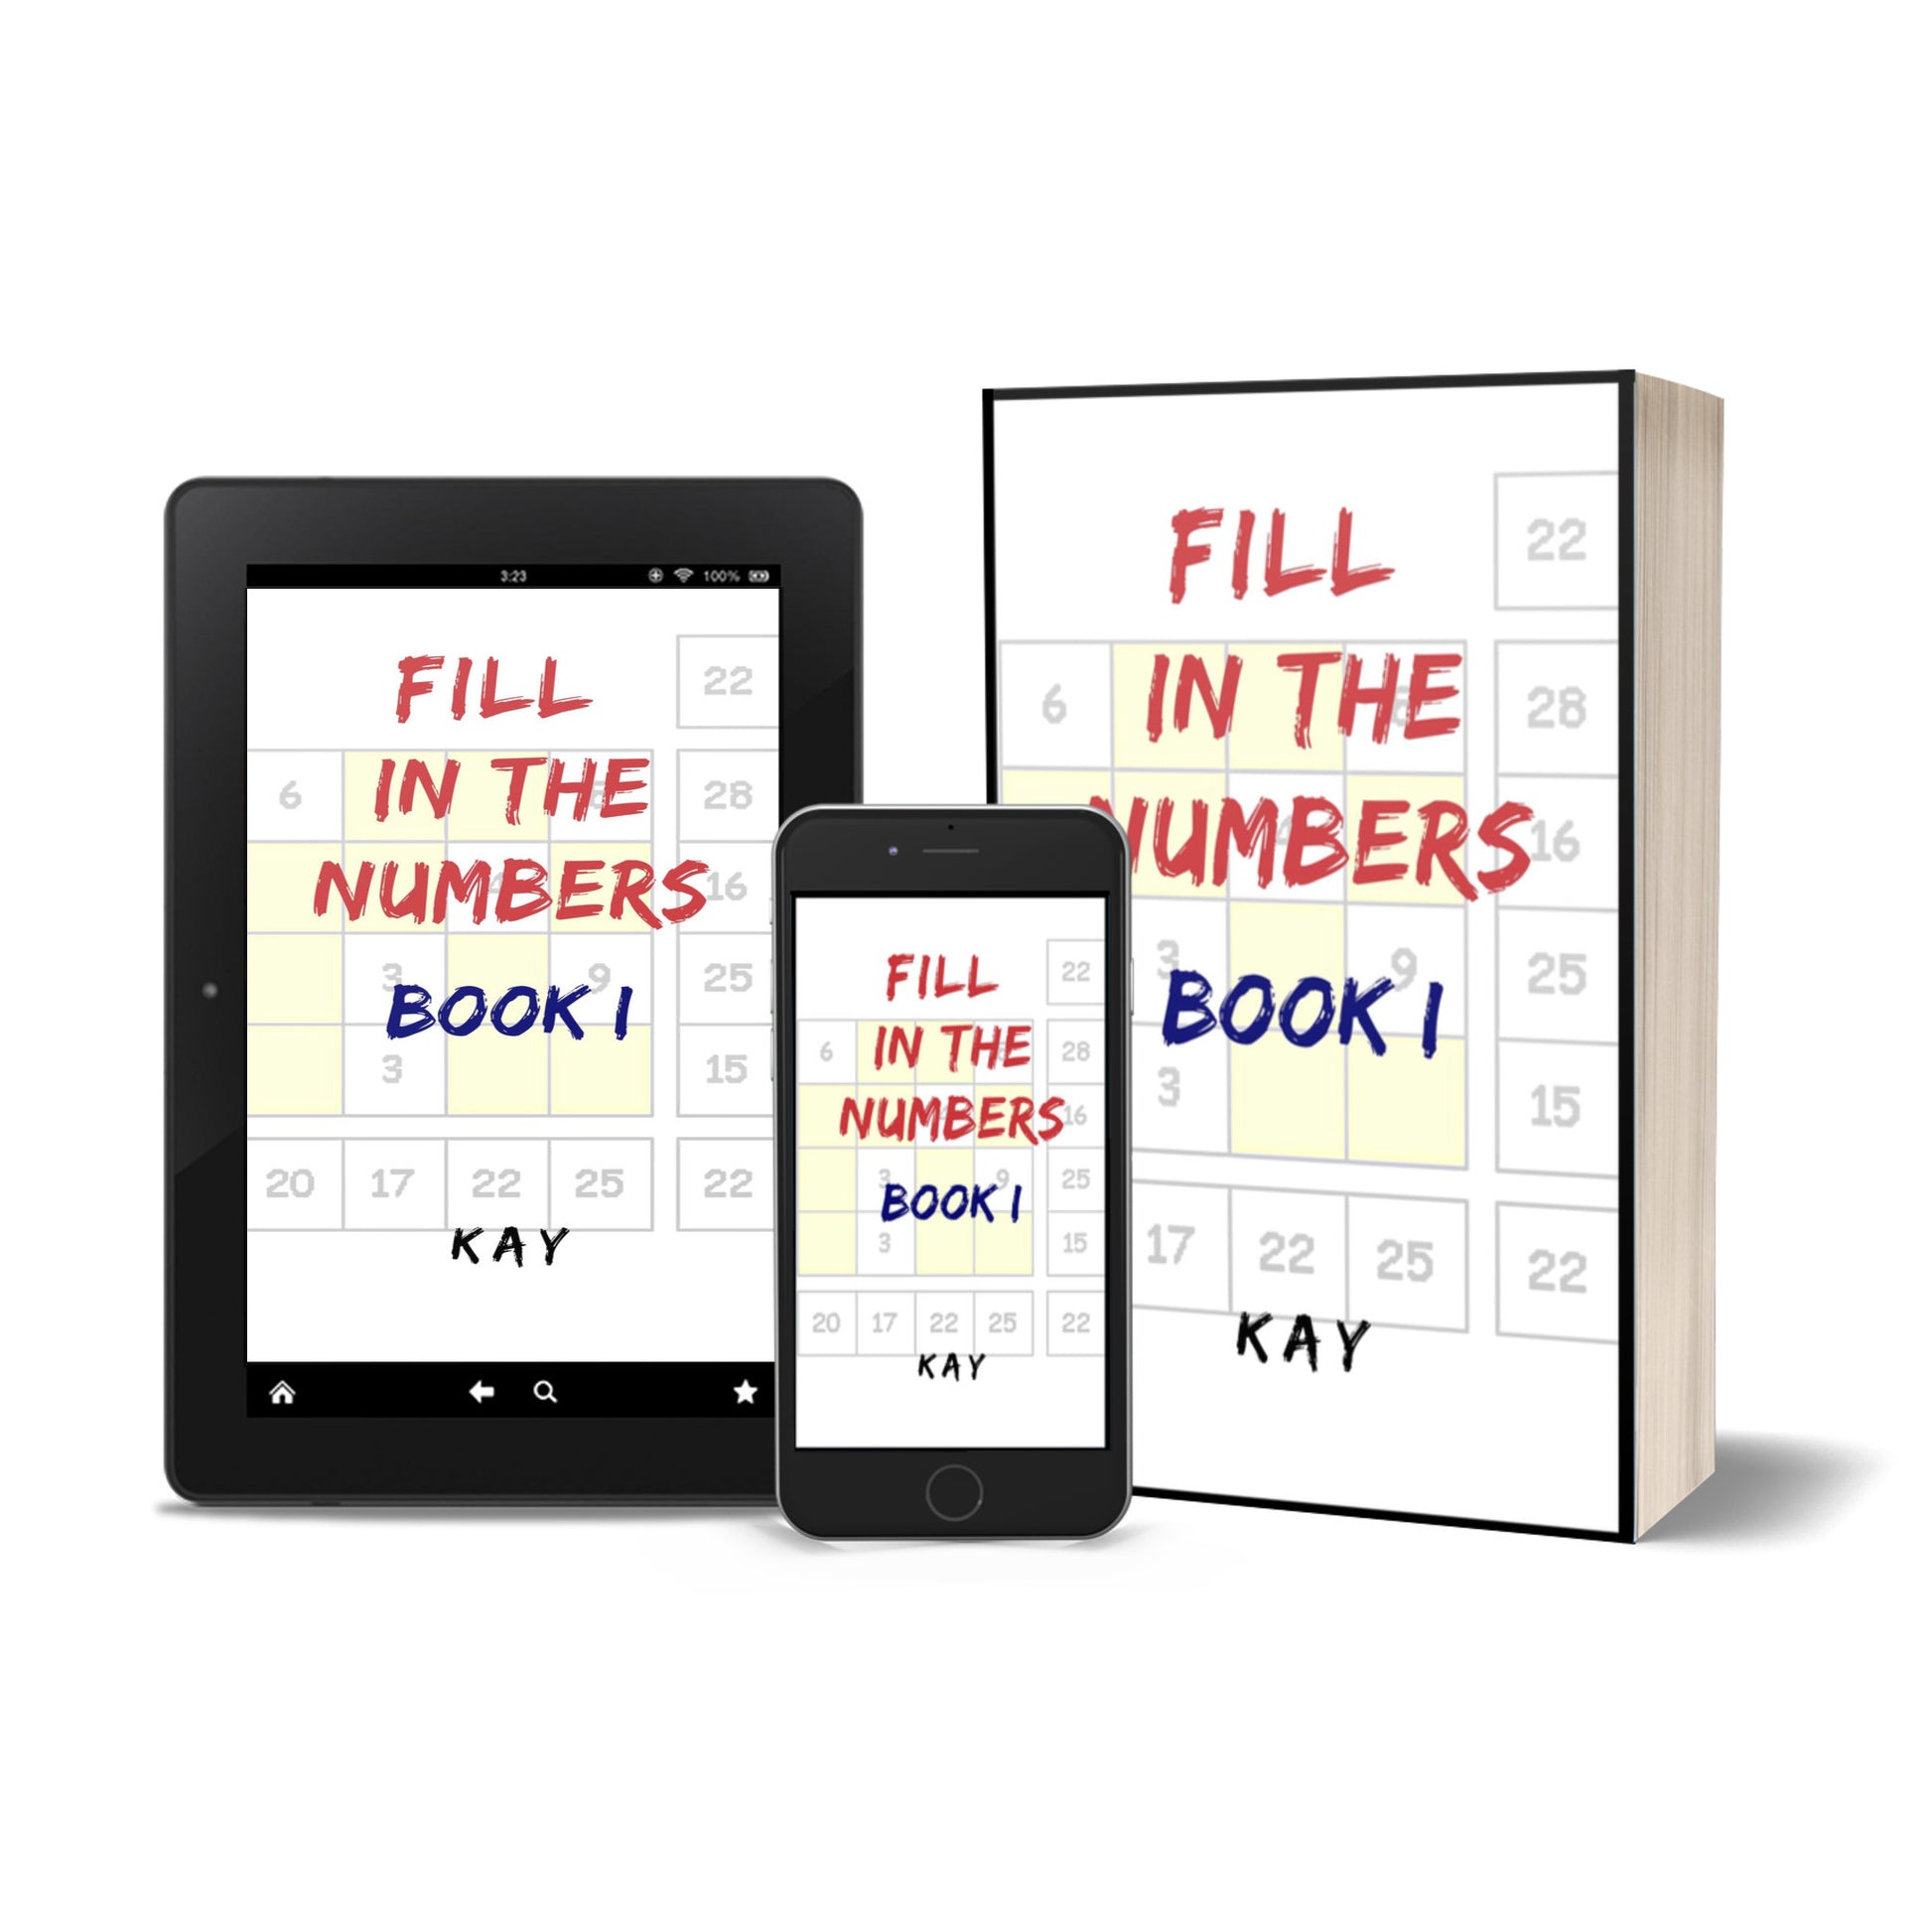 Fill in the Numbers Book I Digital Download